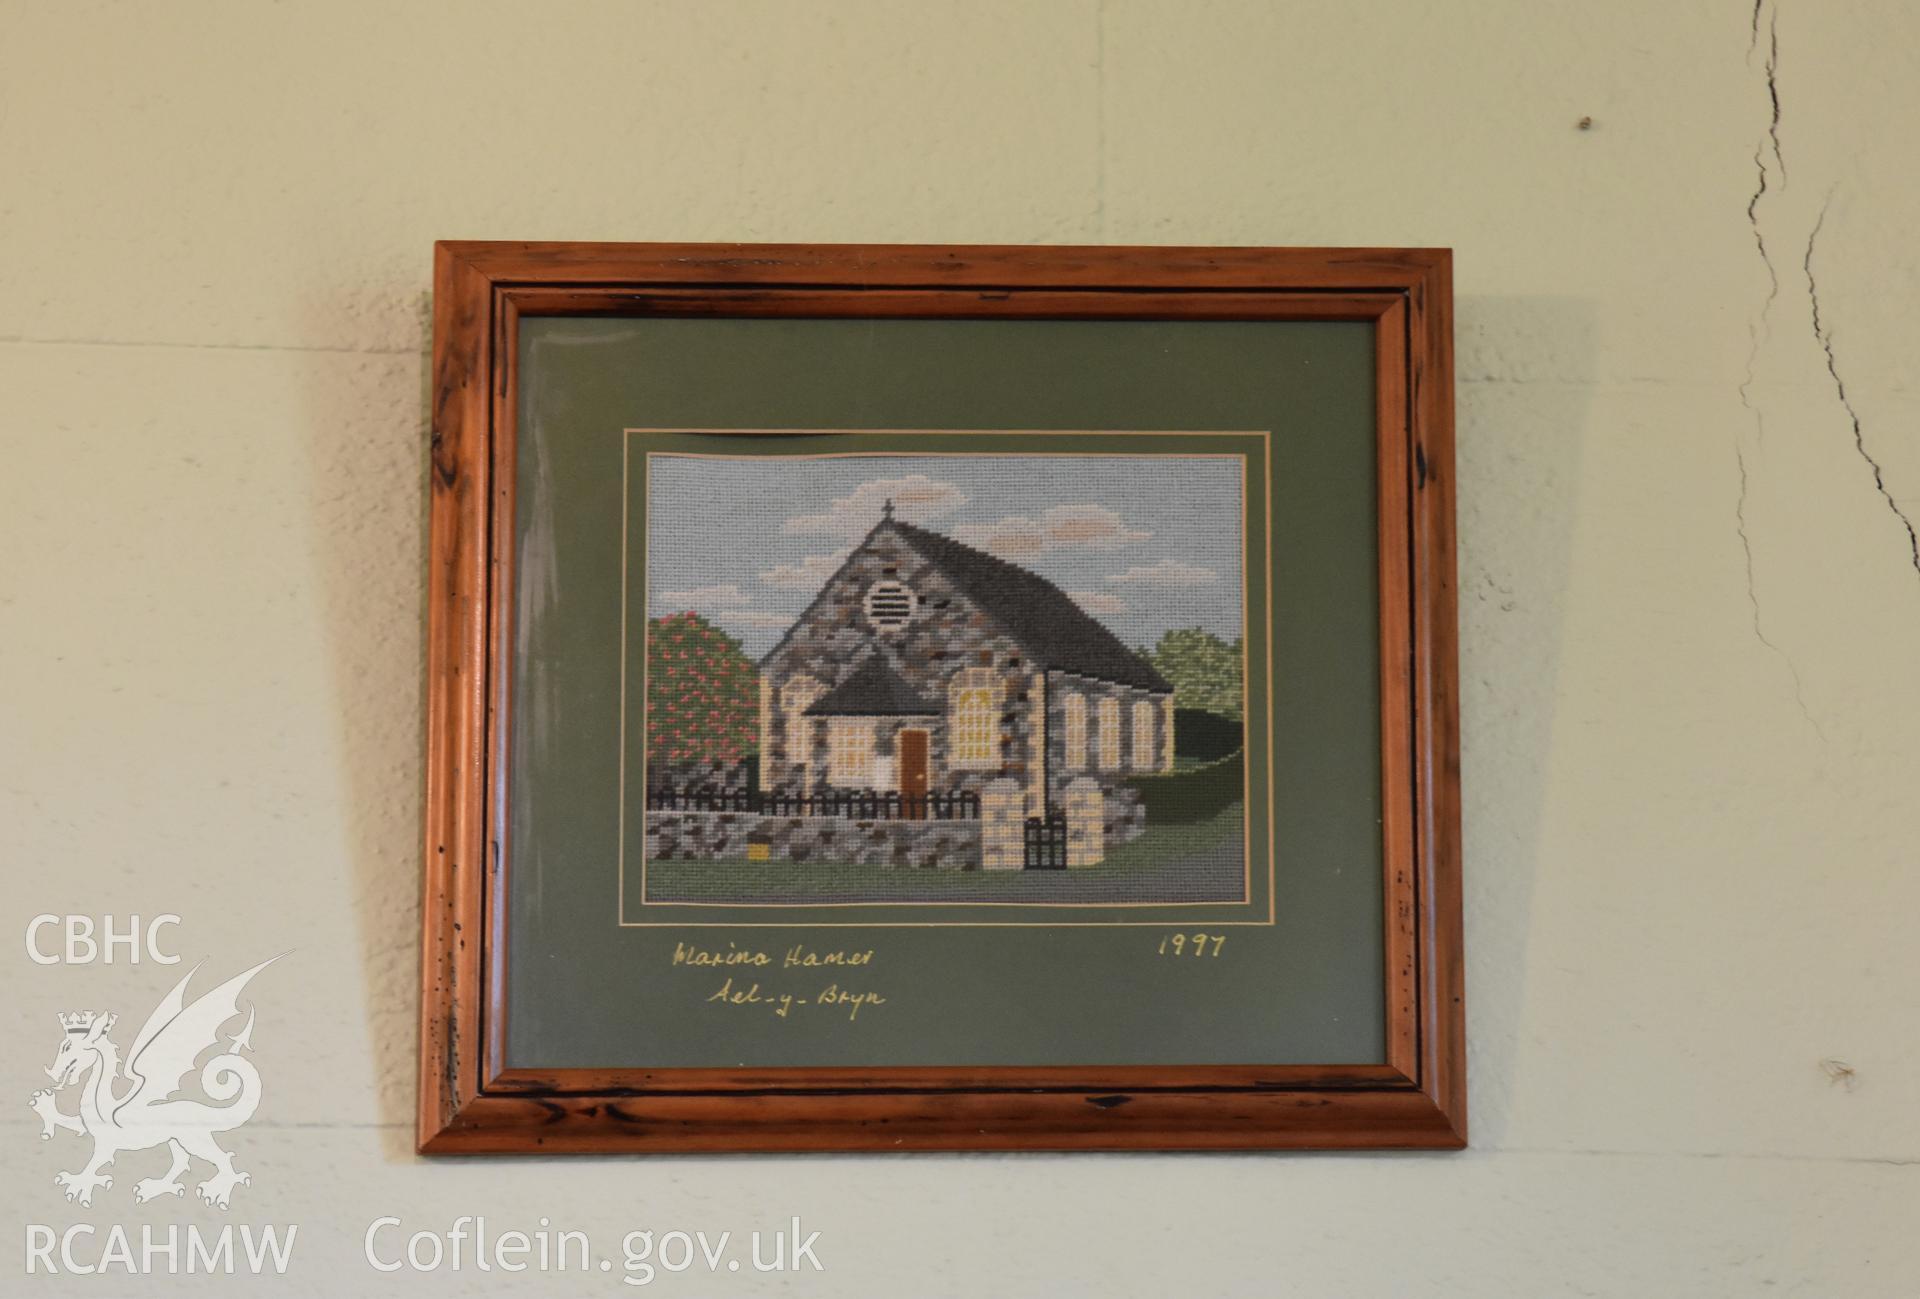 Colour photograph showing framed tapestry of Hyssington Chapel, signed 'Marina Hamer, Ael-y-Bryn 1997' at Hyssington Primitive Methodist Chapel, Hyssington, Churchstoke. Photographic survey conducted by Sue Fielding on 7th December 2018.